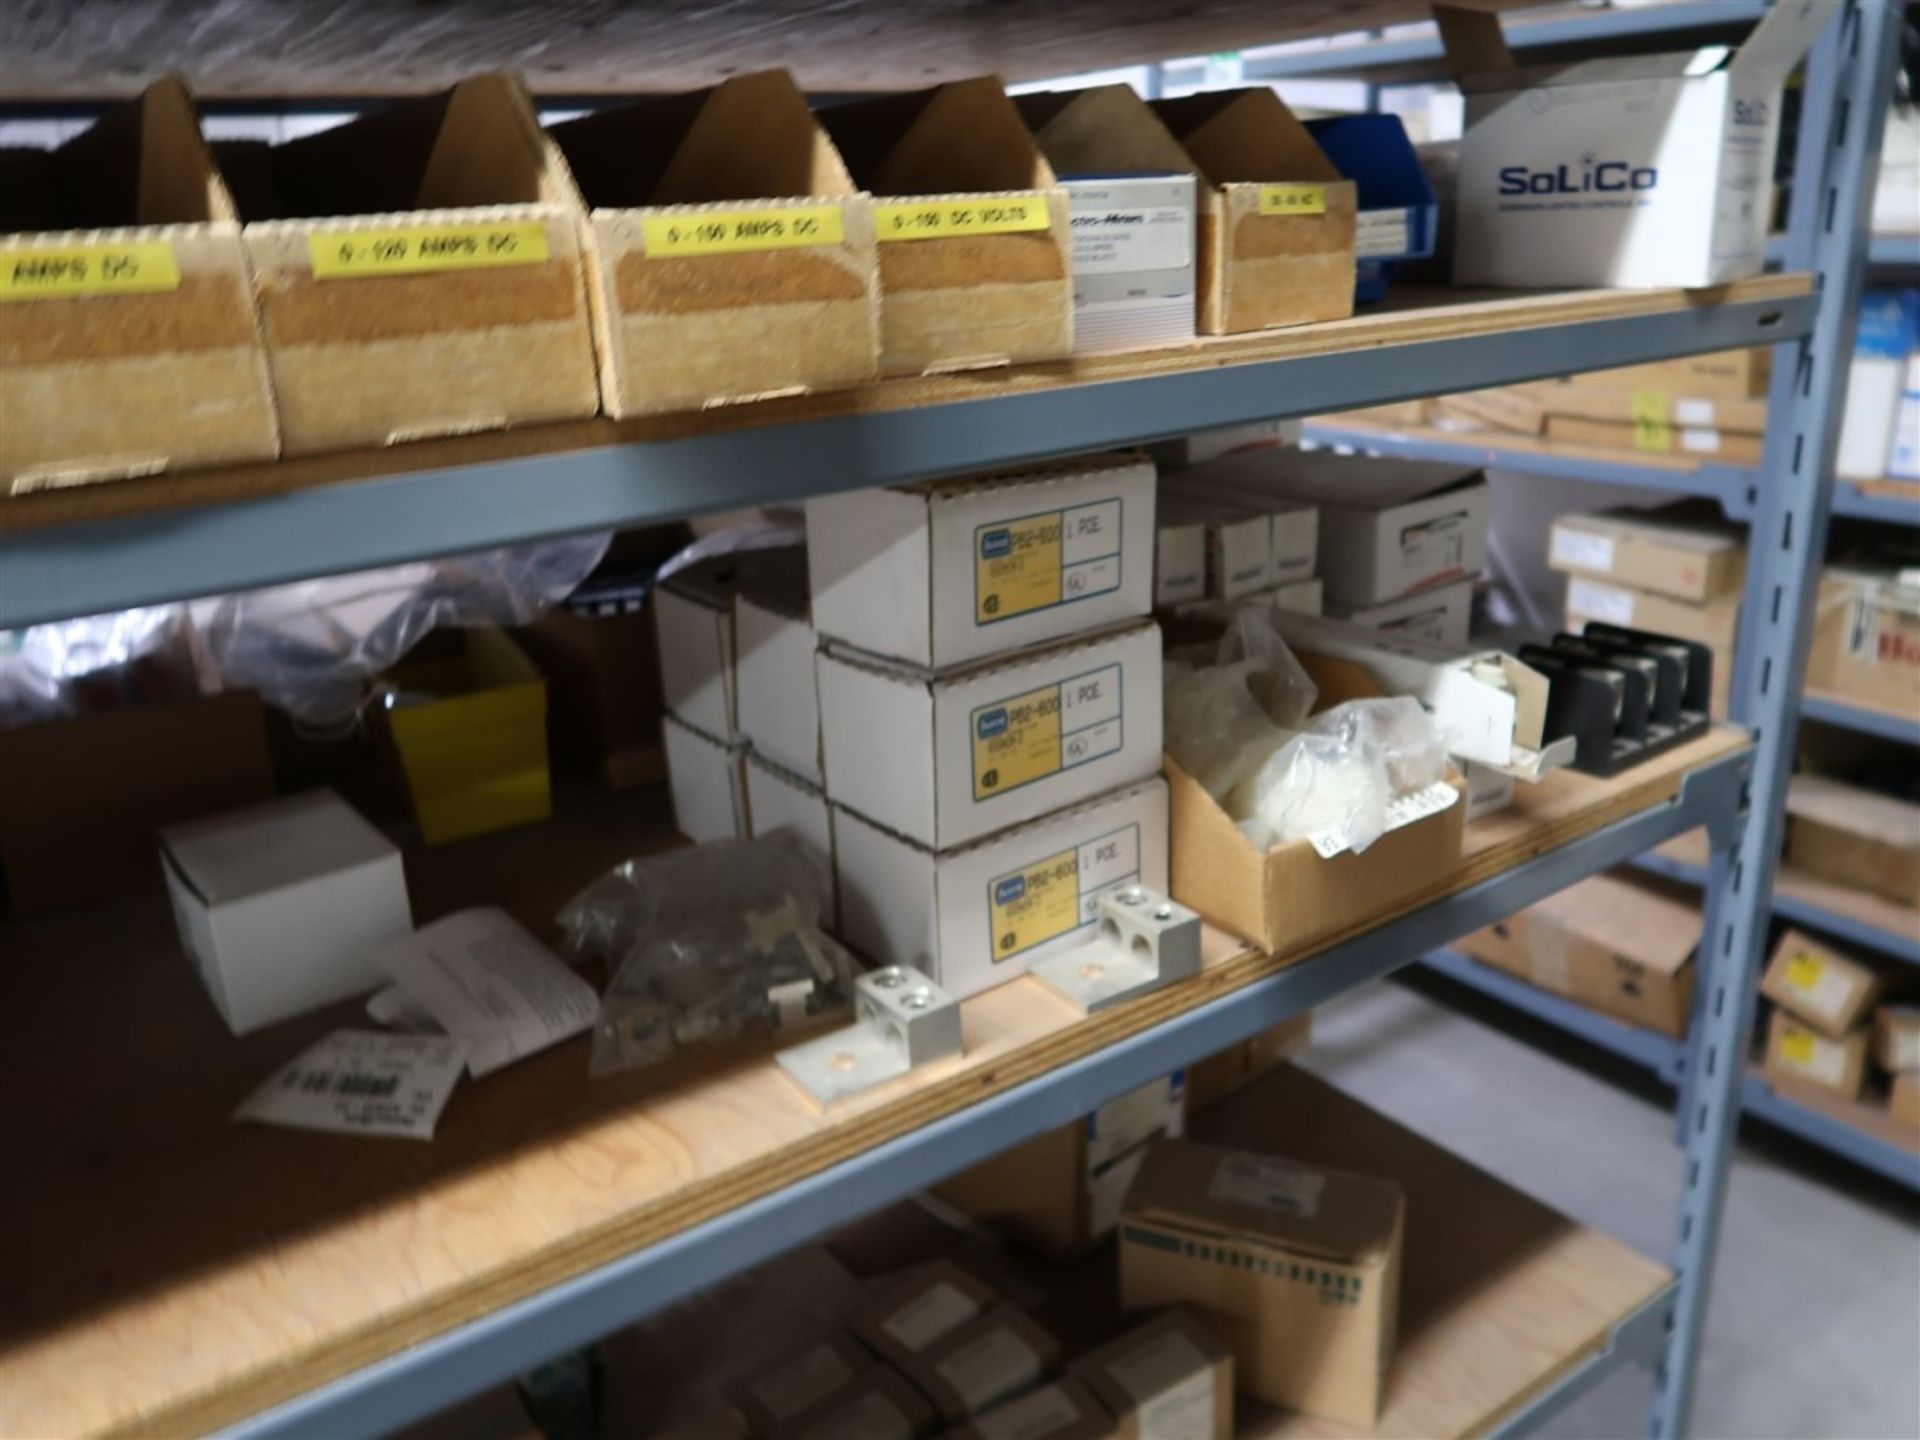 CONTENTS OF 8 SECTION SHELF UNIT - ASSORTED ELEC. PARTS (LOTS 702 TO 738 - UPSTAIRS) - Image 10 of 10